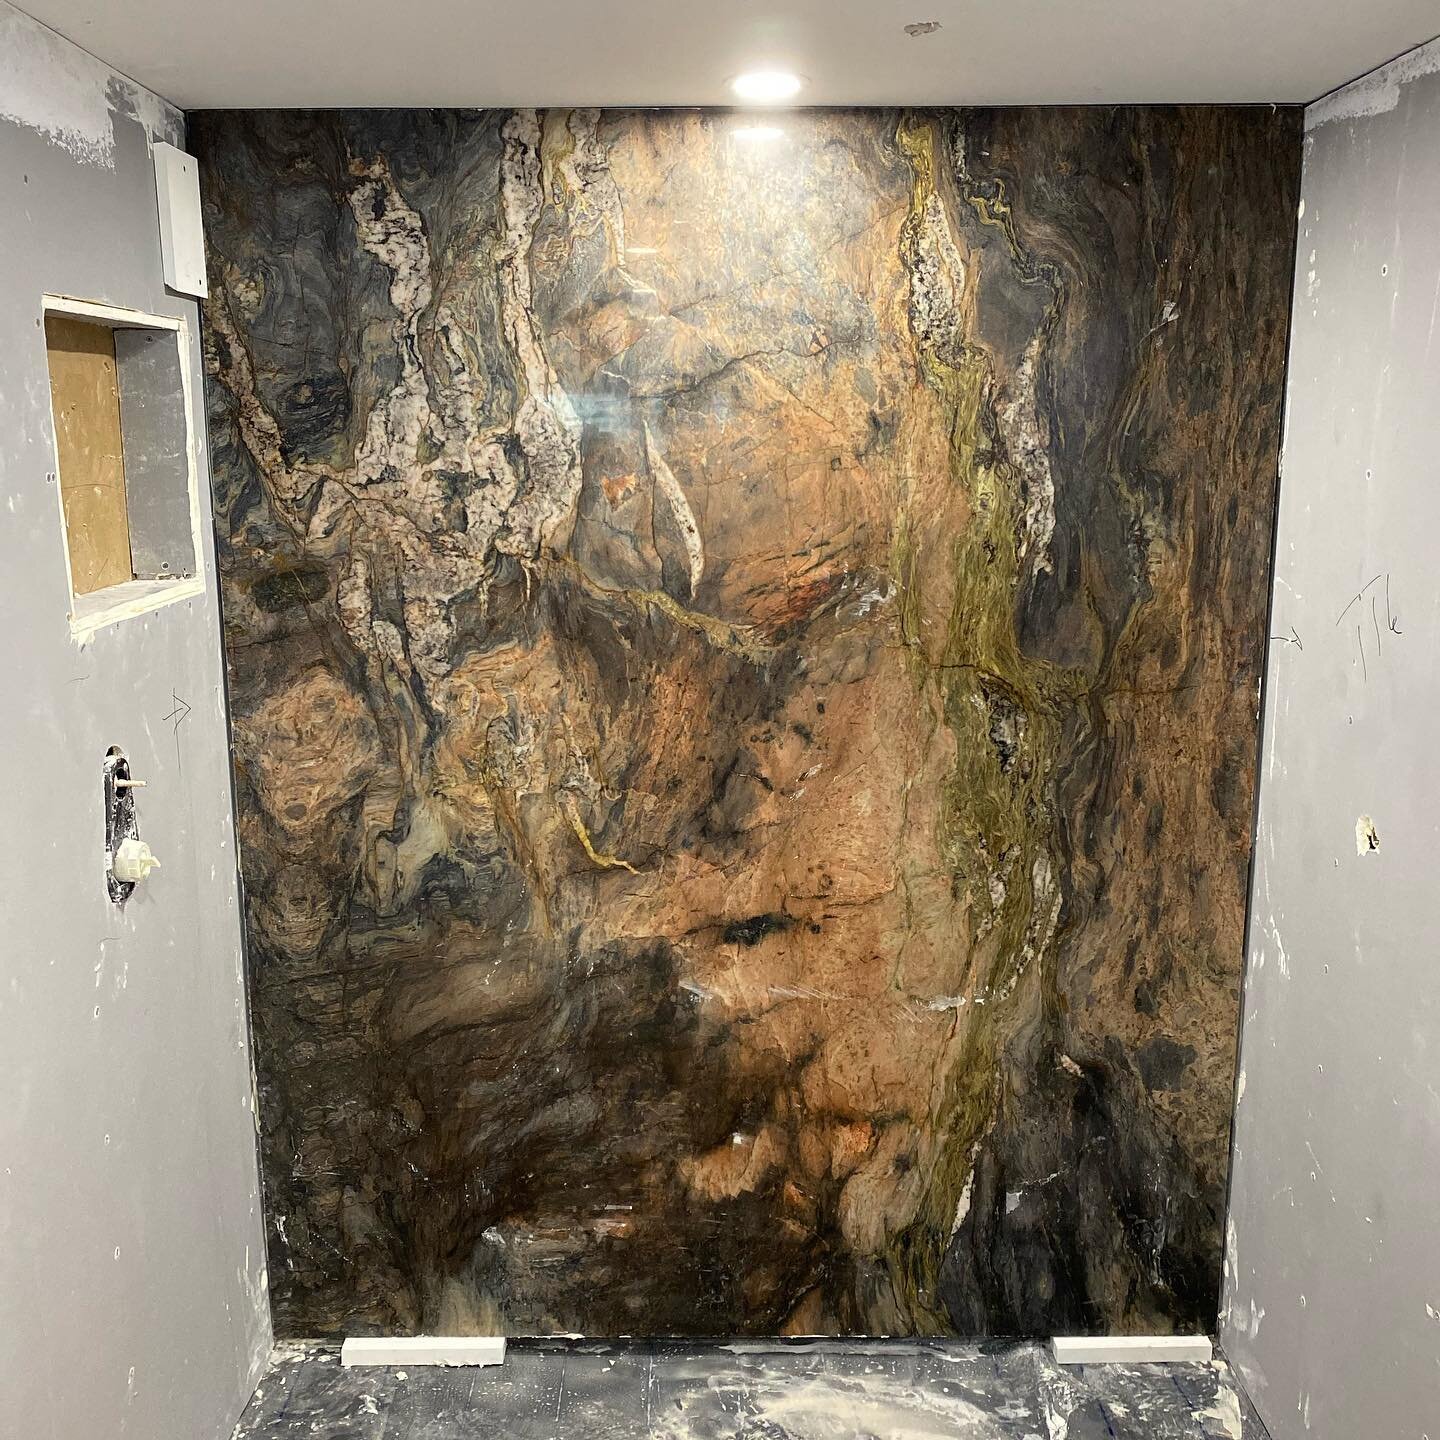 Shower accent wall done in 1 piece, no seam ! #granite #natural #naturalstone #stone #shower #wall #work